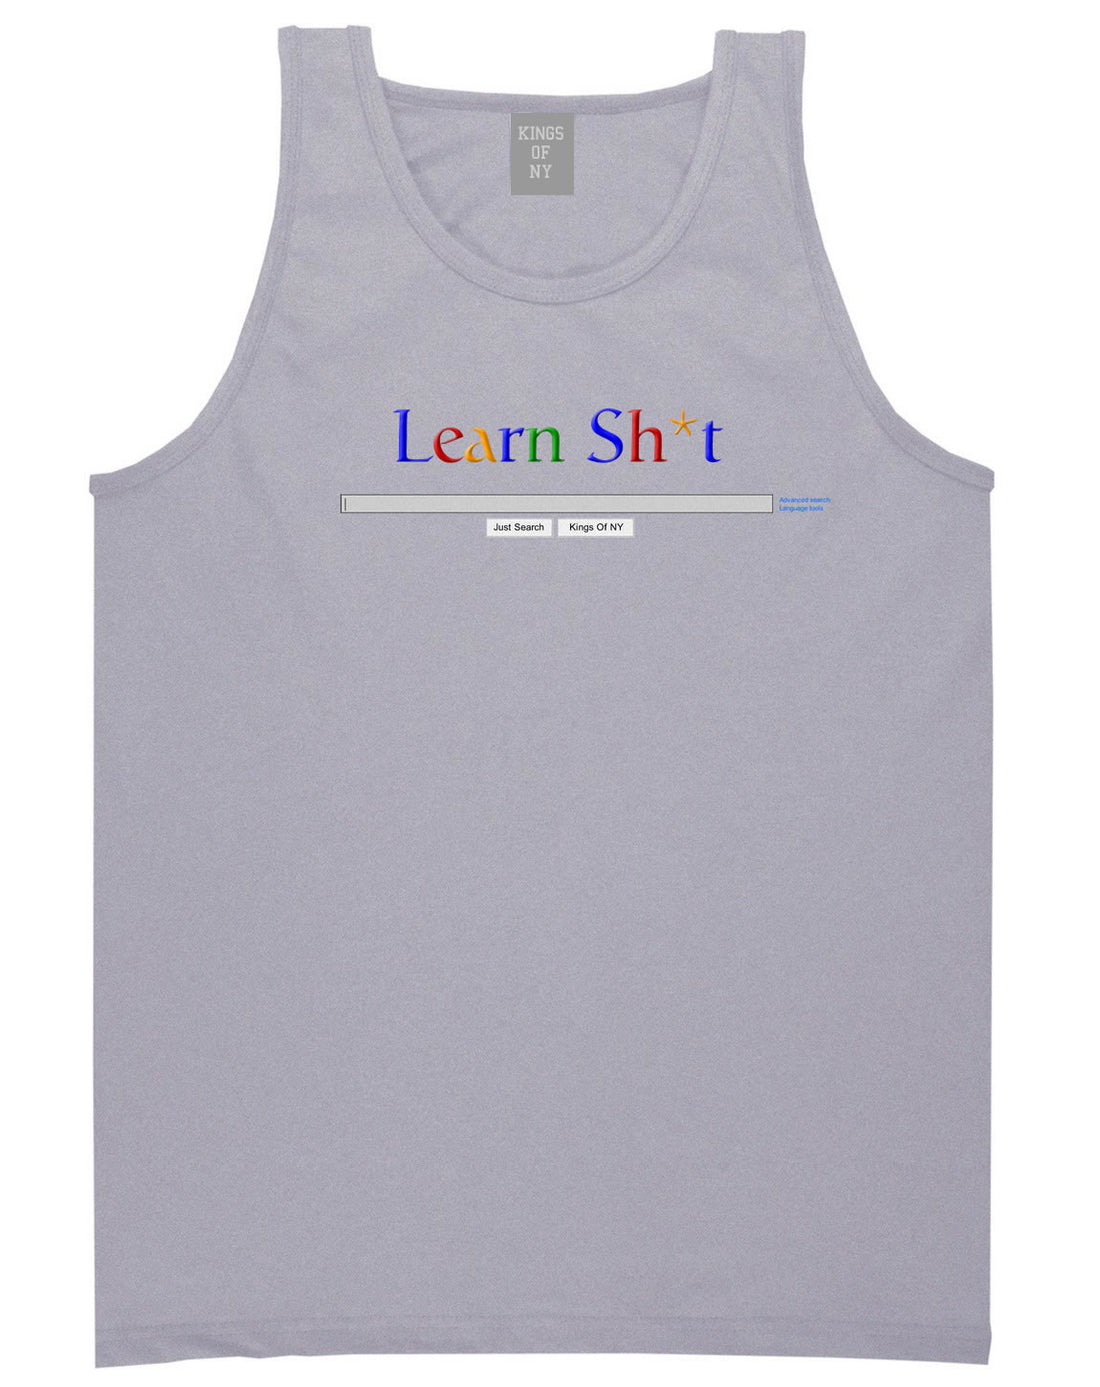 Learn Shit Search Tank Top in Grey By Kings Of NY